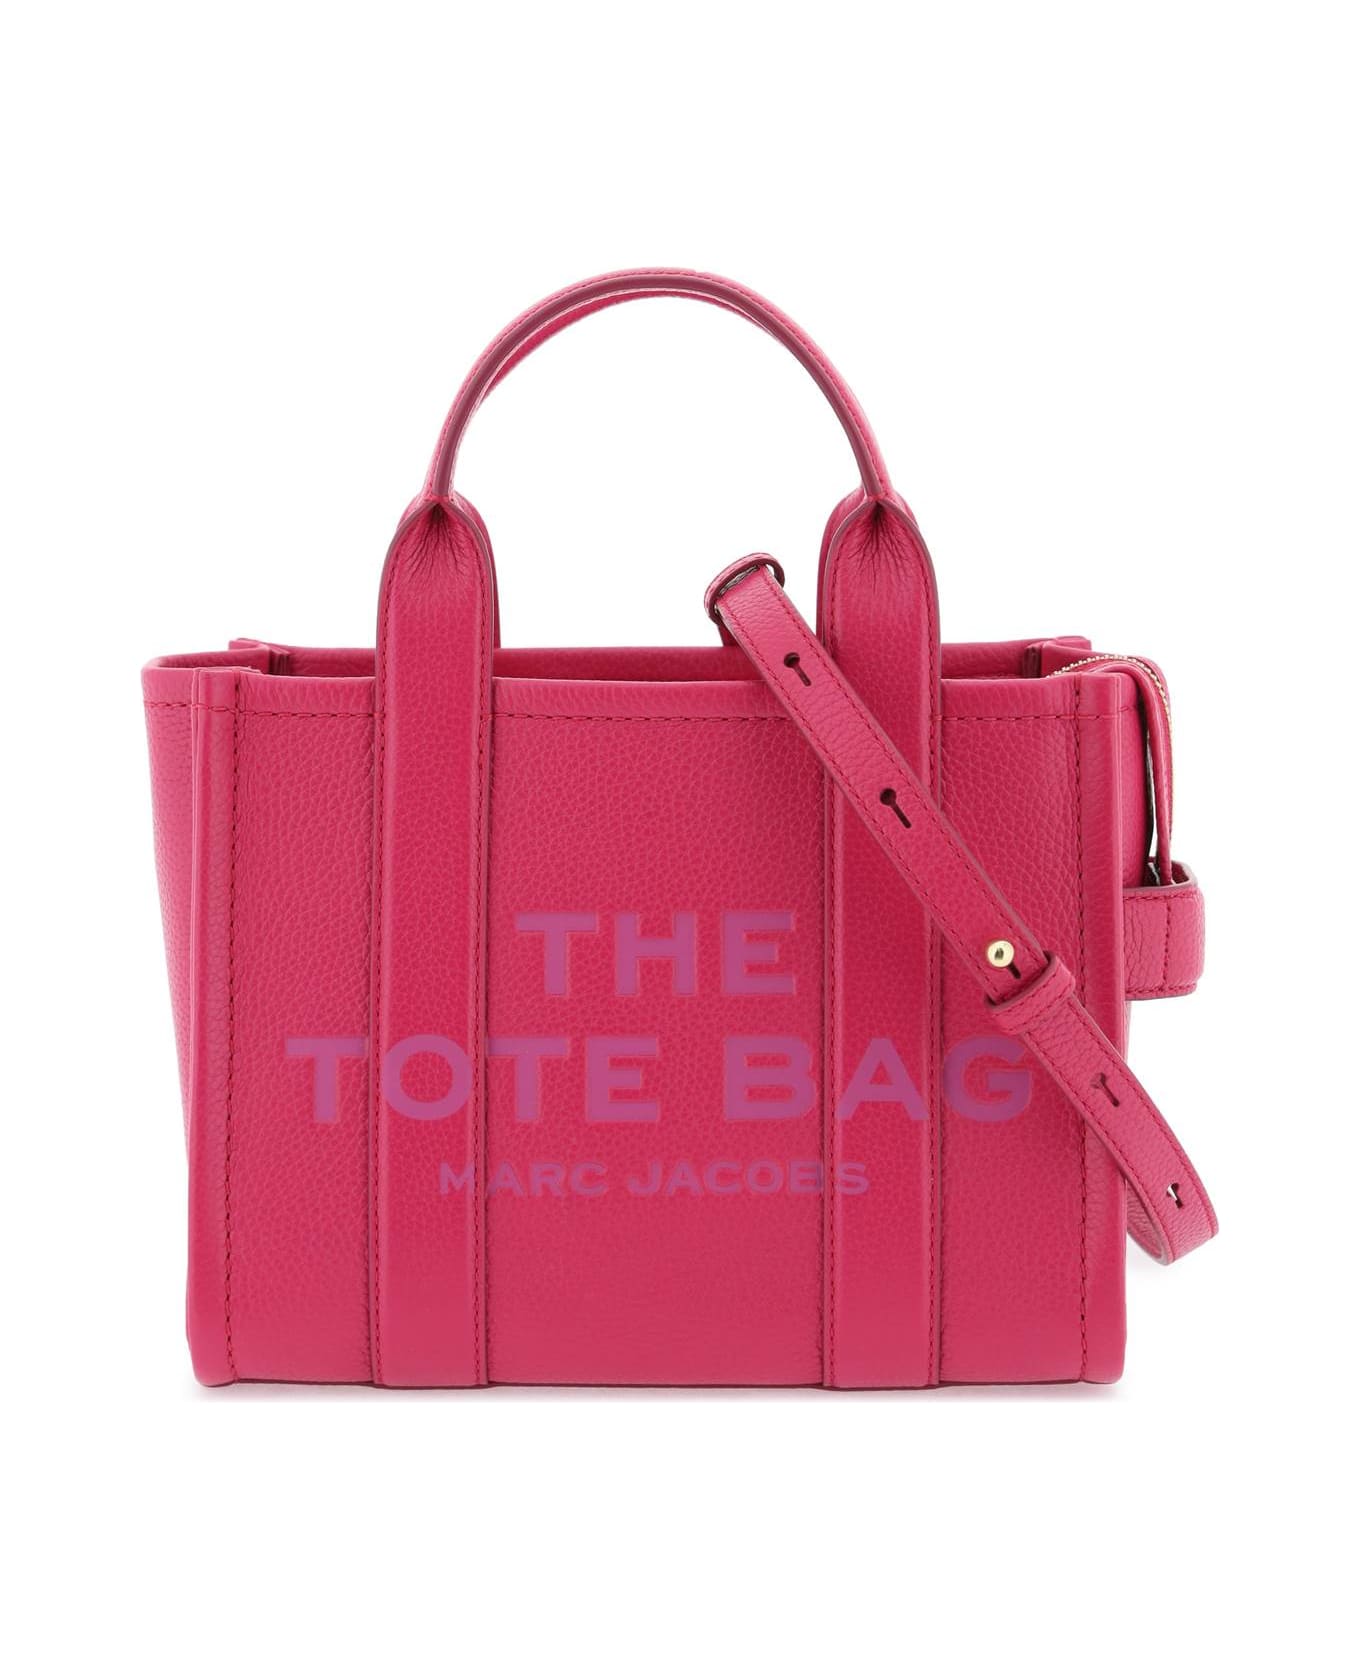 Marc Jacobs The Leather Small Tote Bag - Violet